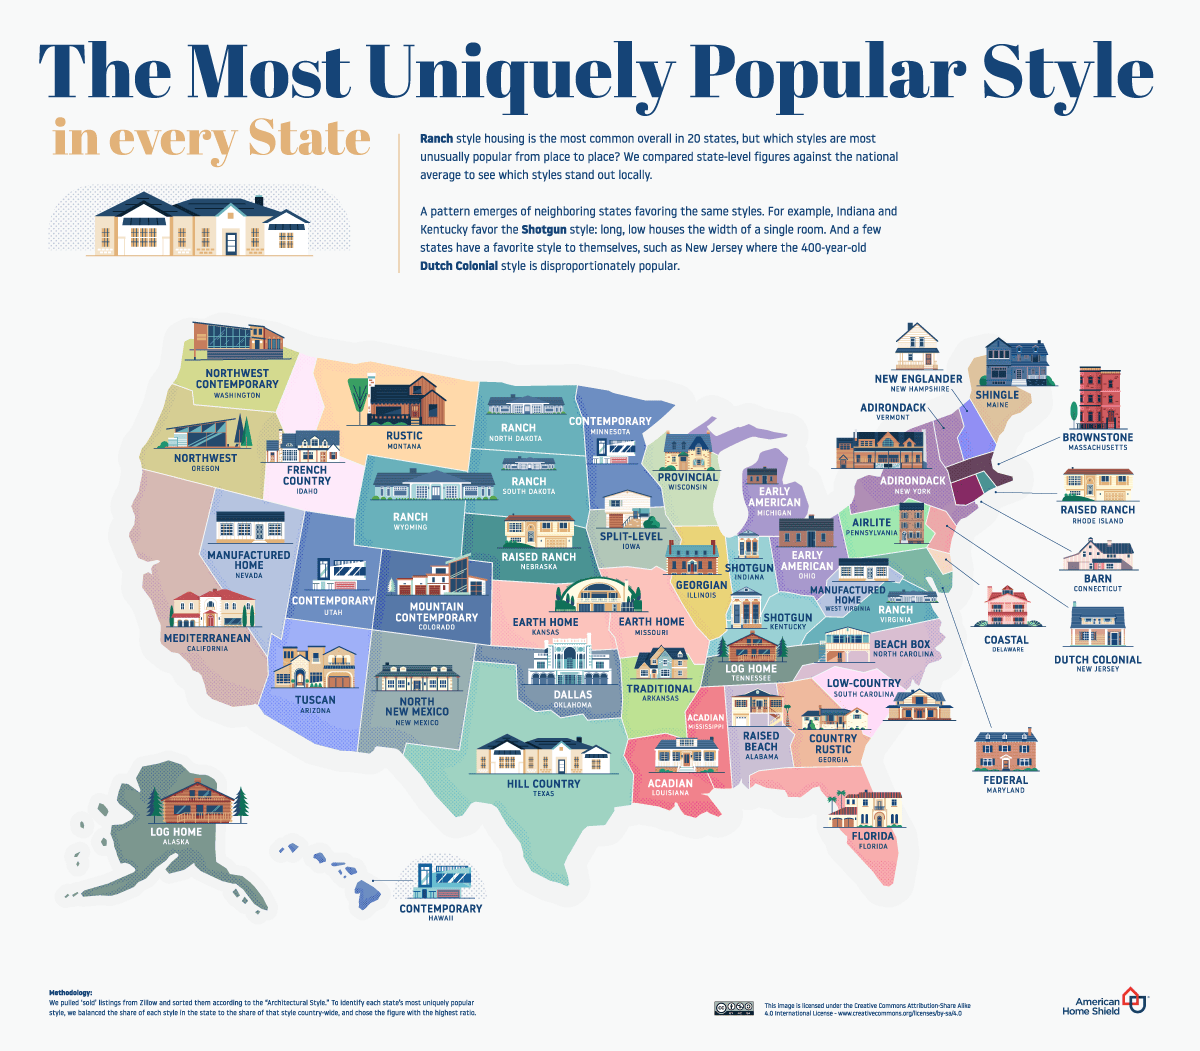 Most Uniquely Popular Style in Every State